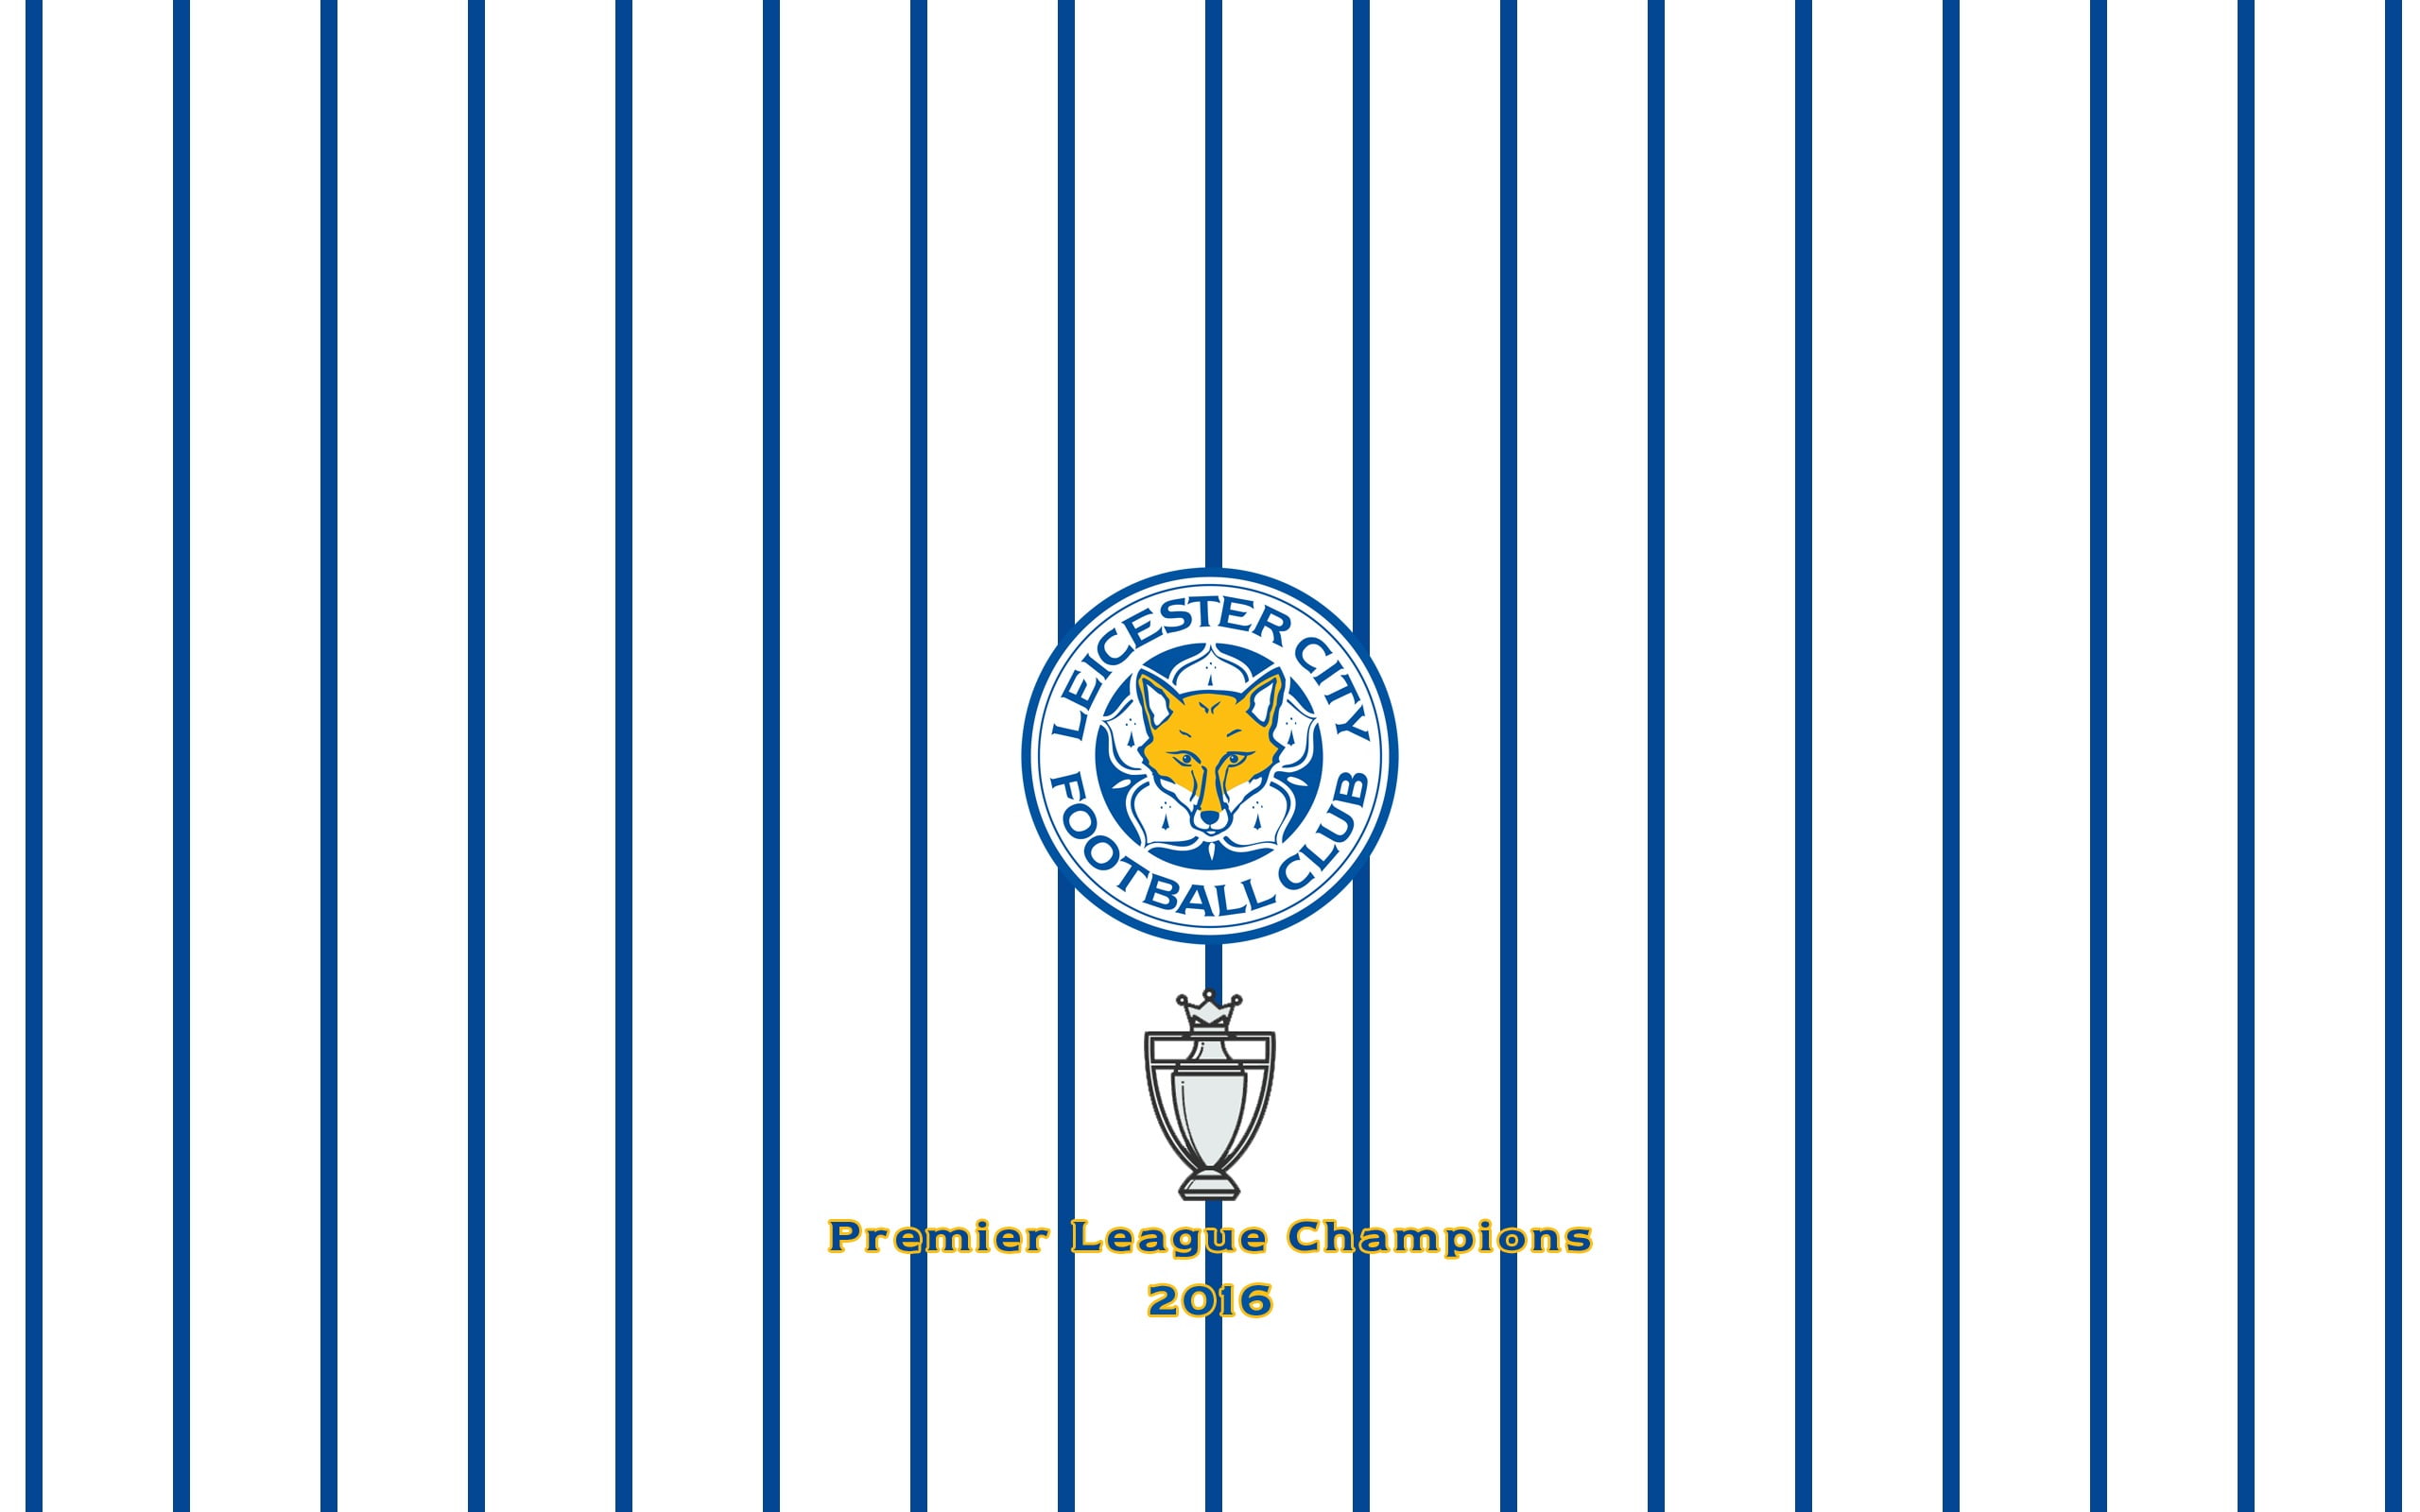 Leicester city champs-European Football Club HD Wa.., no people